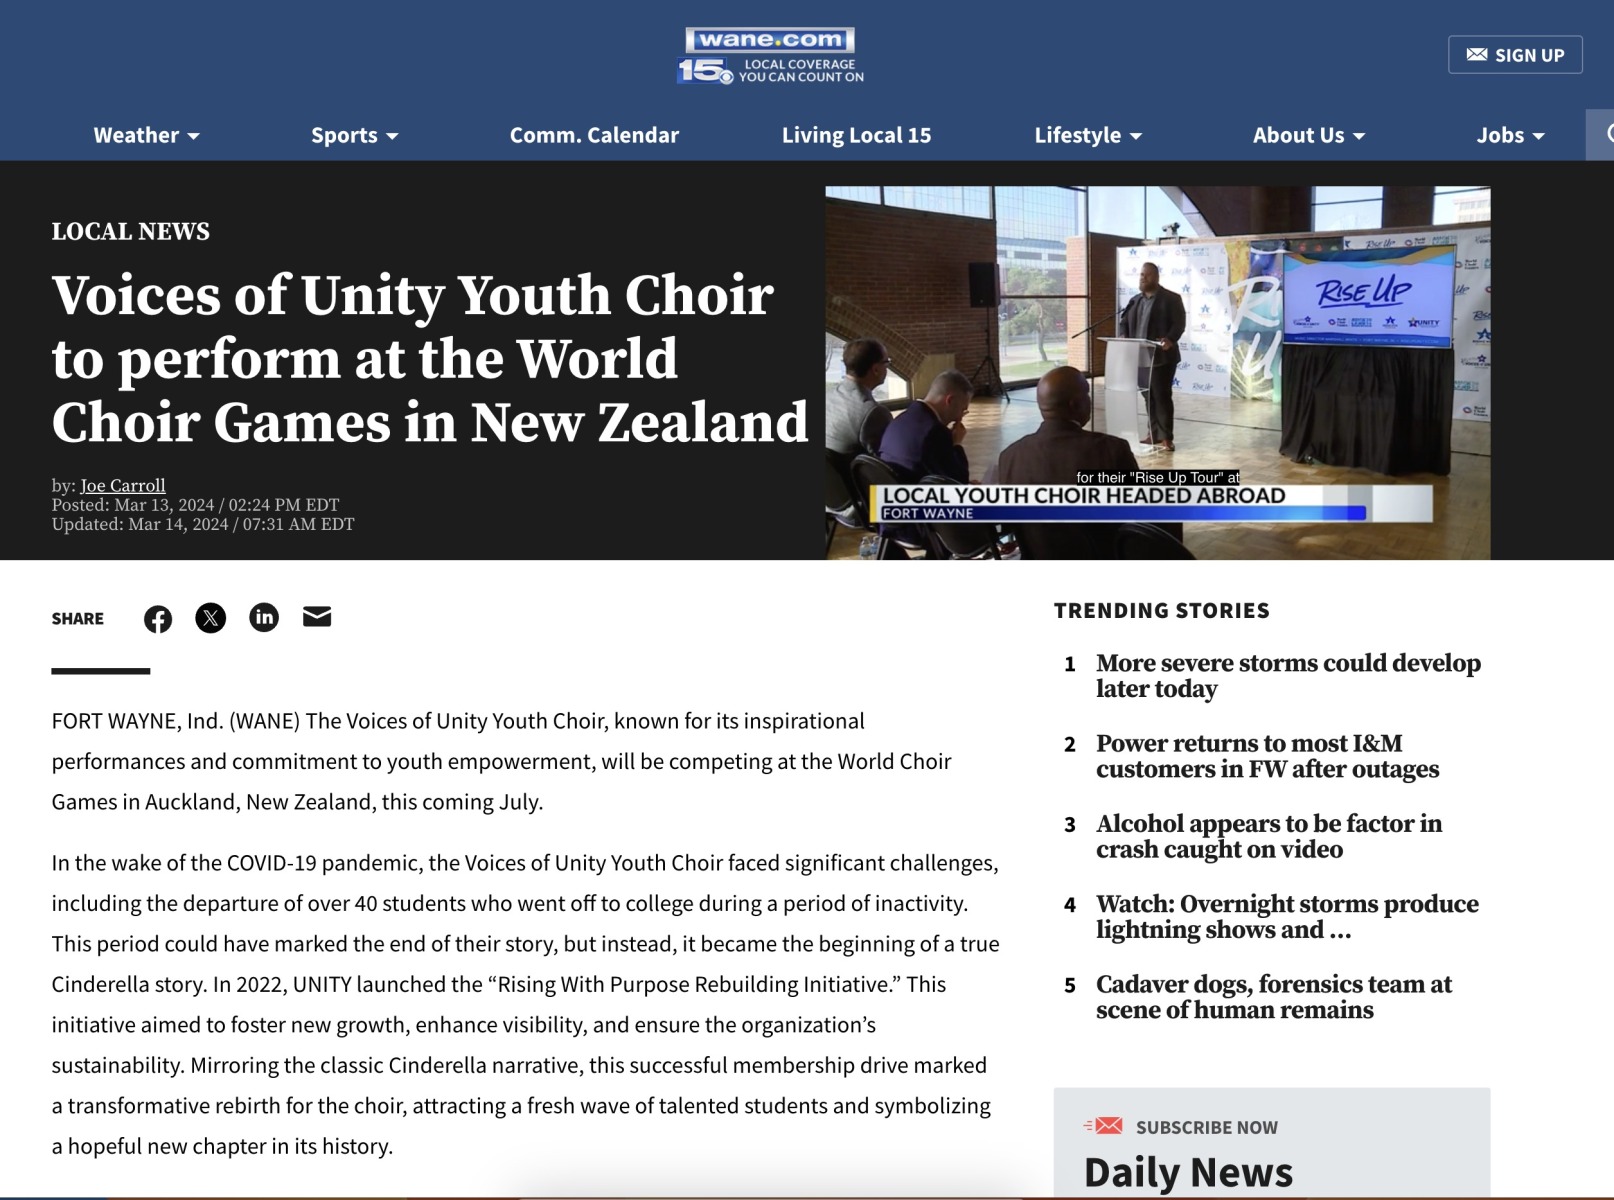 WANE TV: Voices of Unity Youth Choir to perform at the World Choir Games in New Zealand